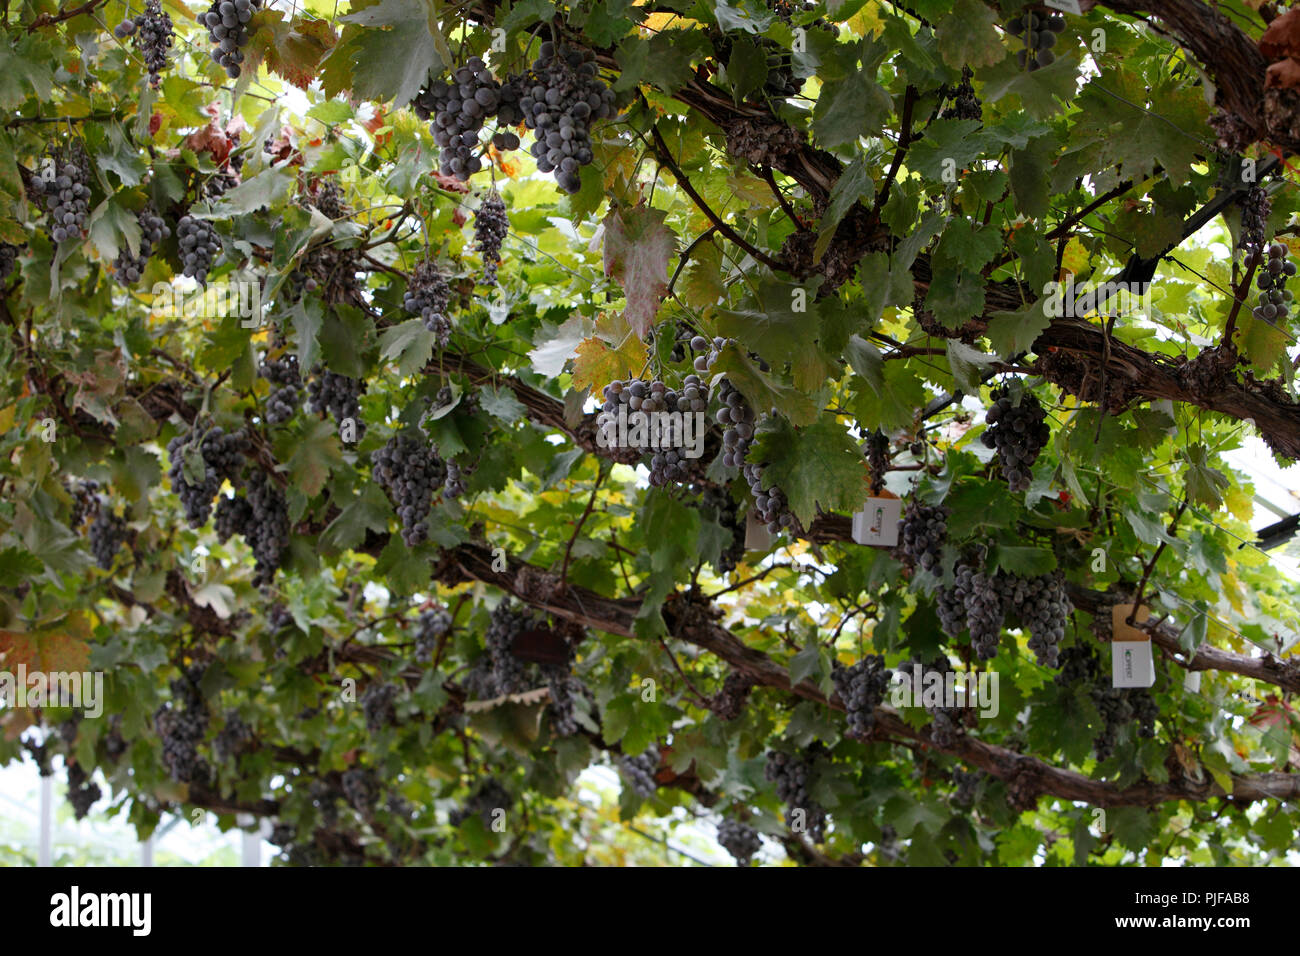 grapevine with ripe or overripe grapes in a greenhouse maturing in the UK. Viticulture. Stock Photo